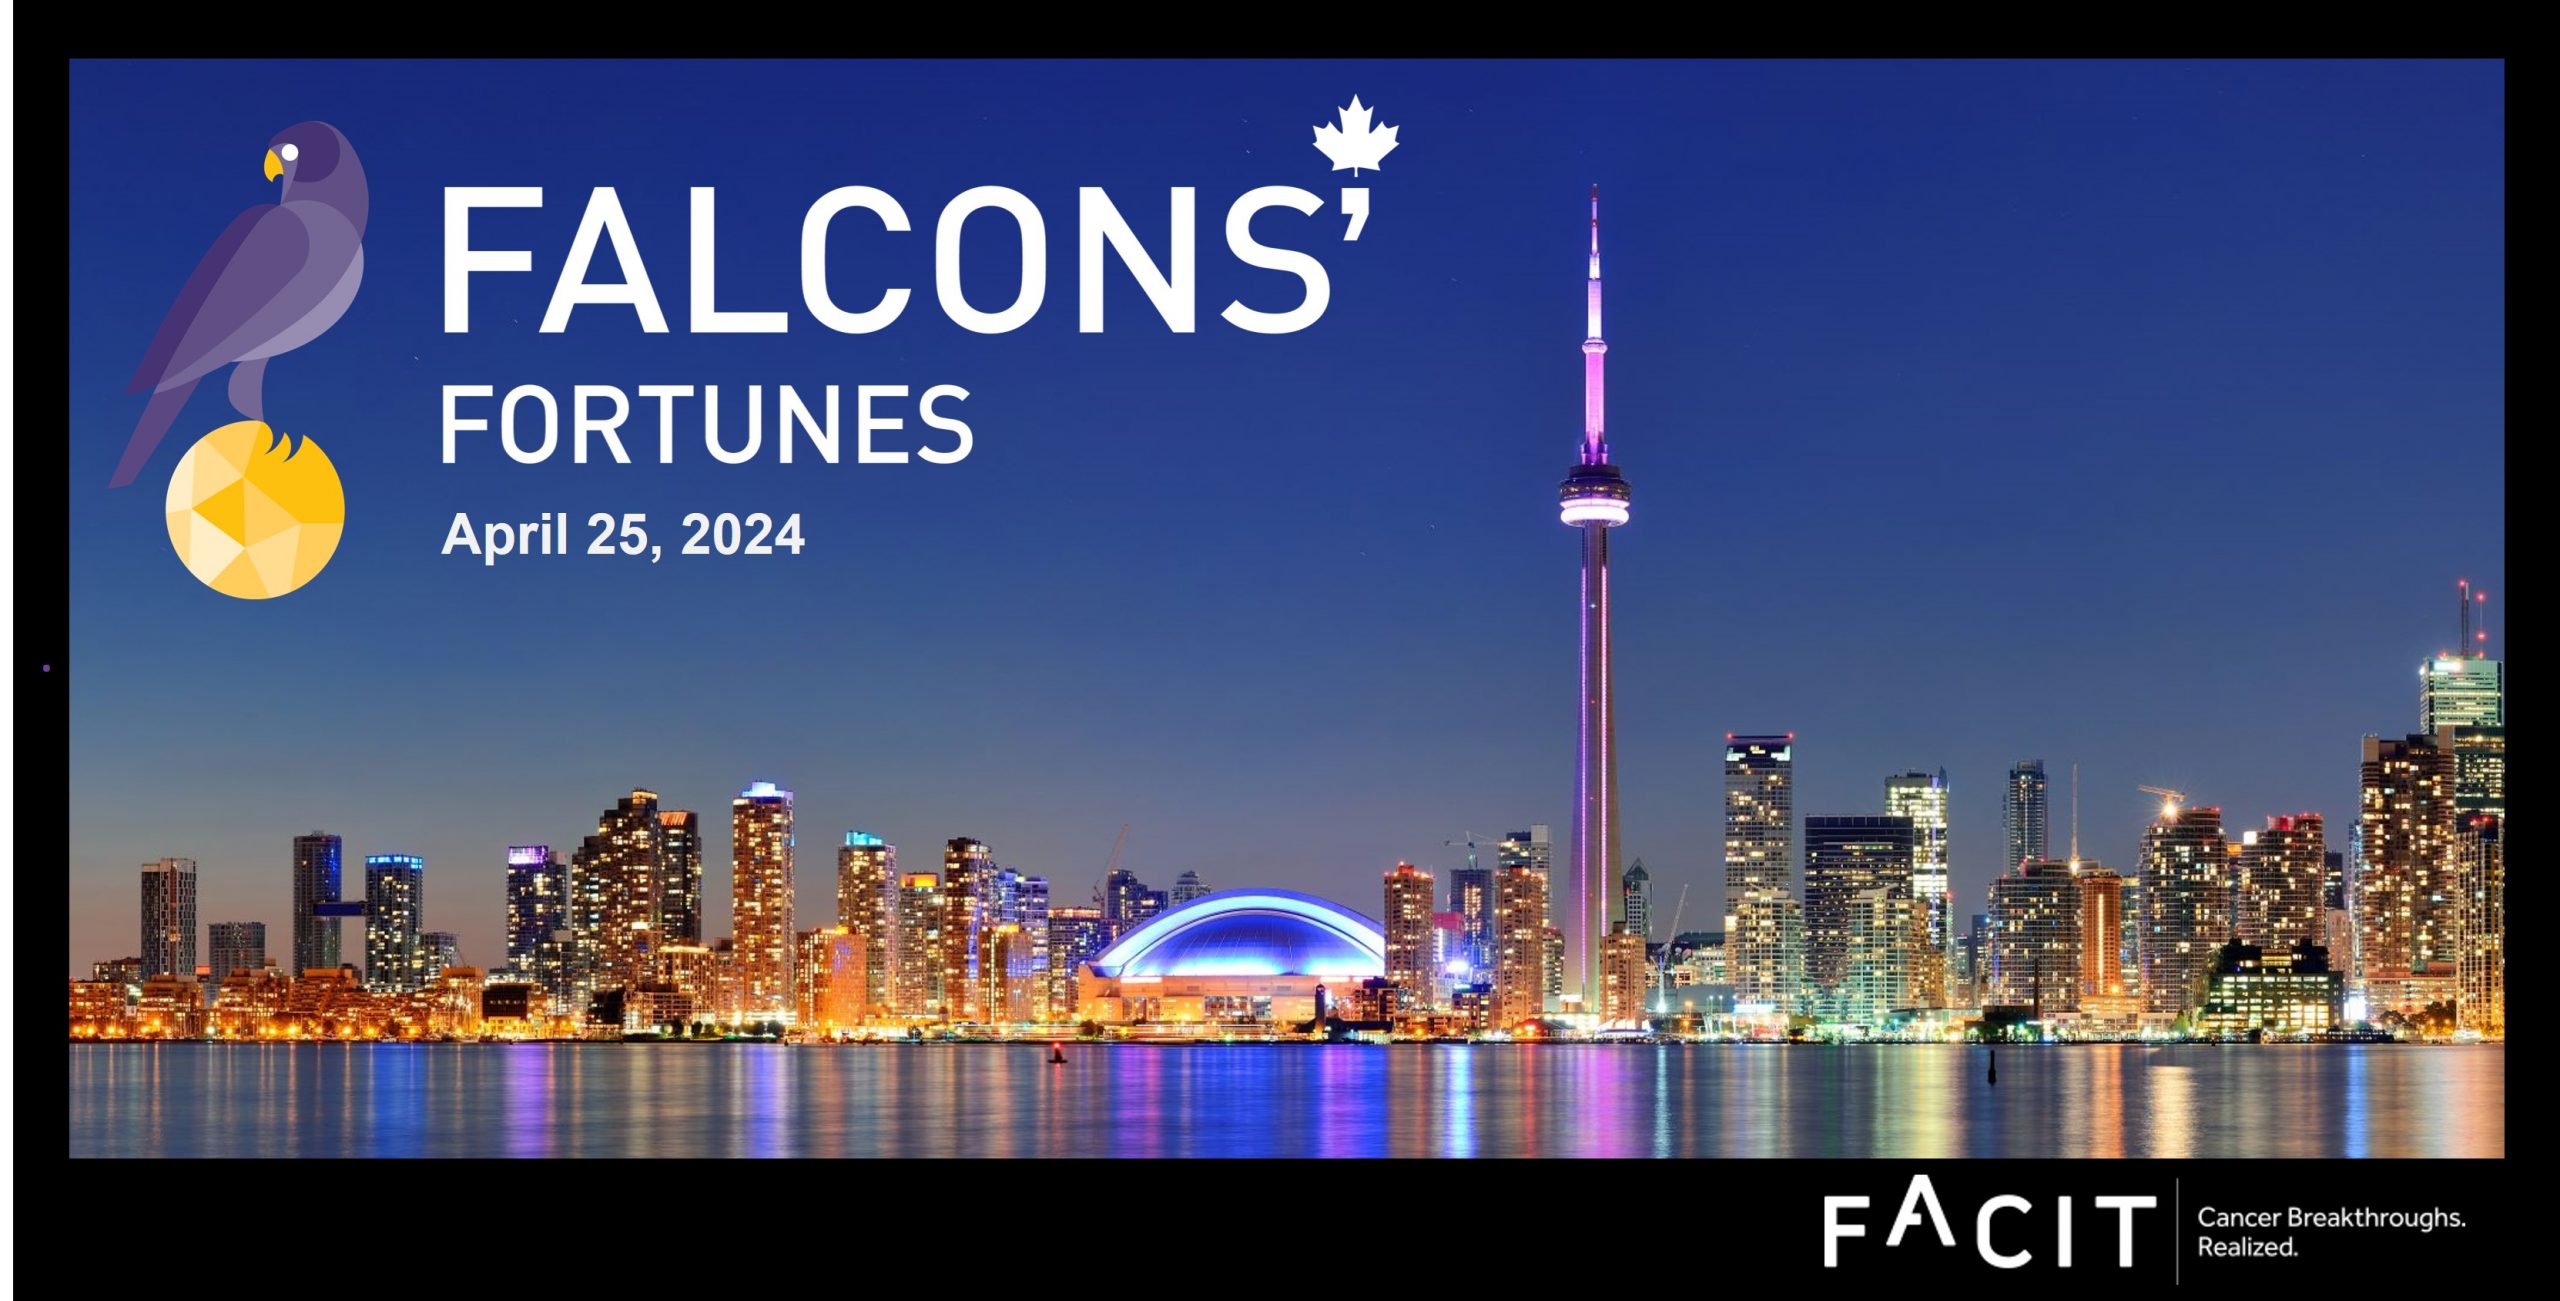 Falcons' Fortunes Pitch Competition Finals Event